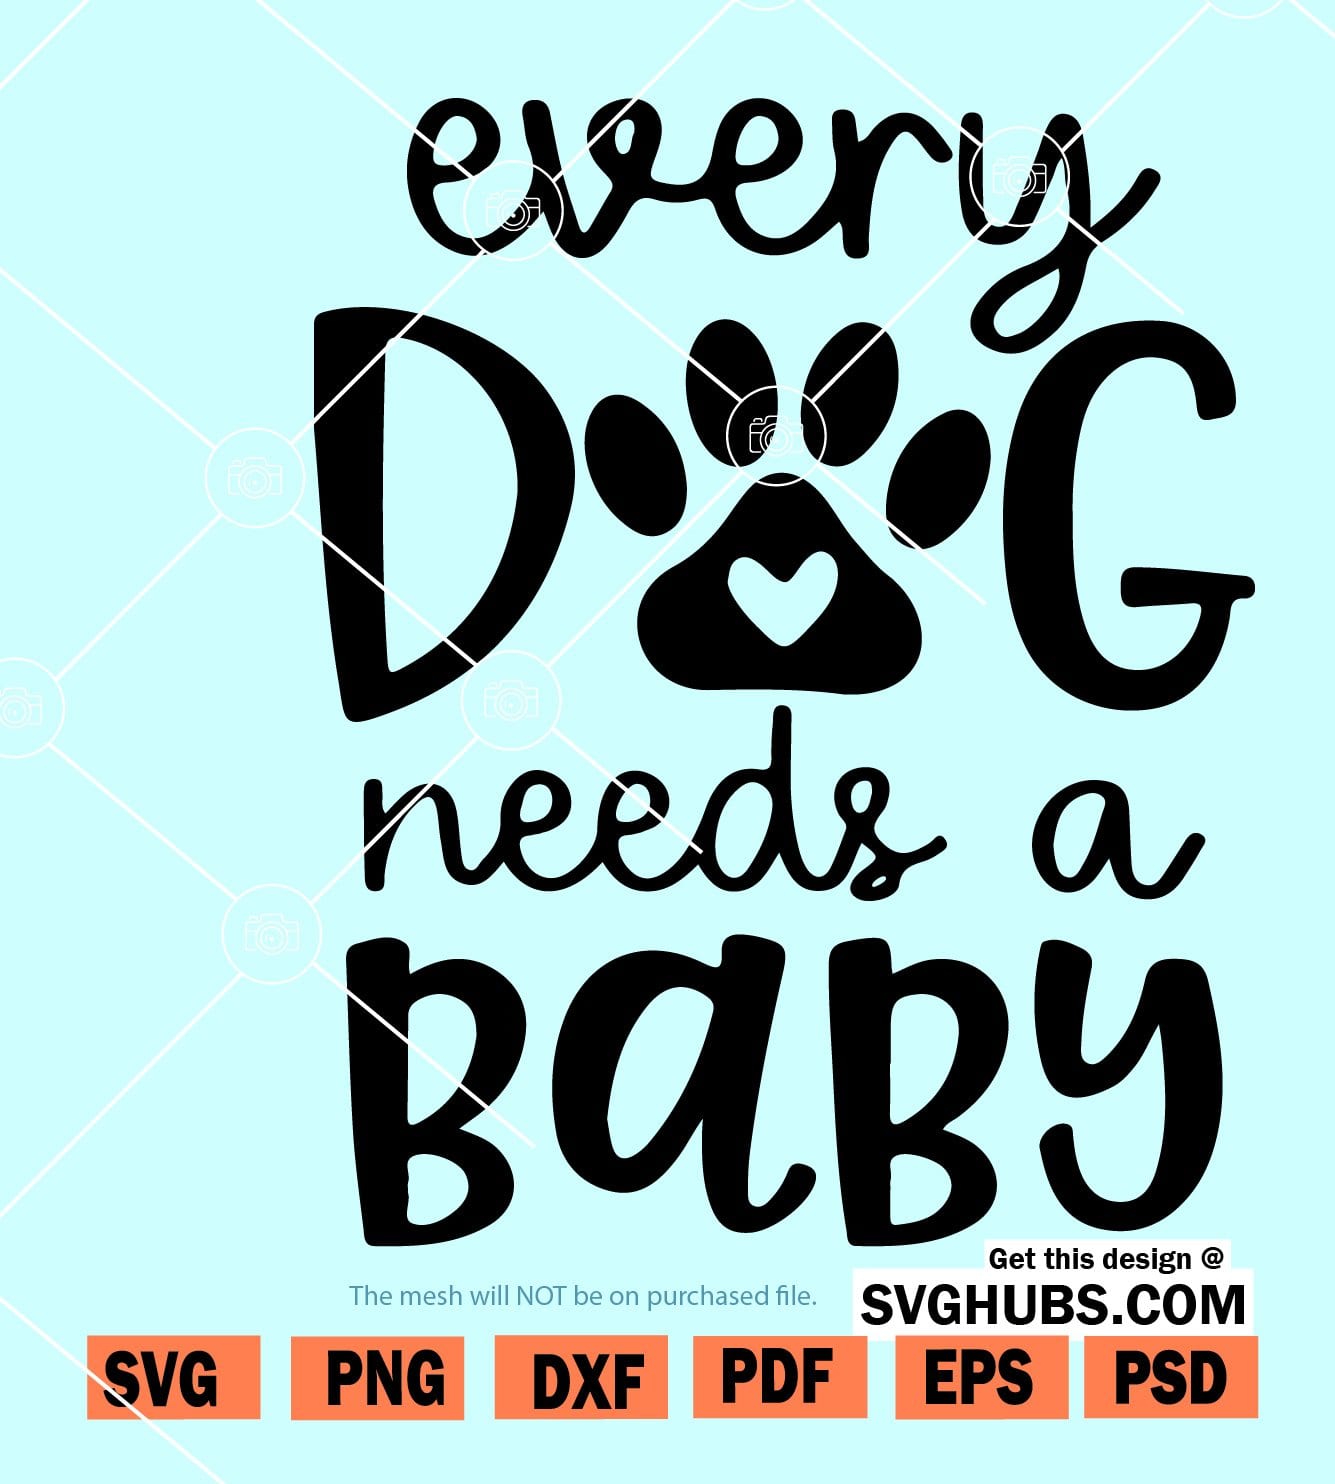 Every Dog Needs A Baby SVG, Dog and baby SVG, Baby svg file - Svg Hubs